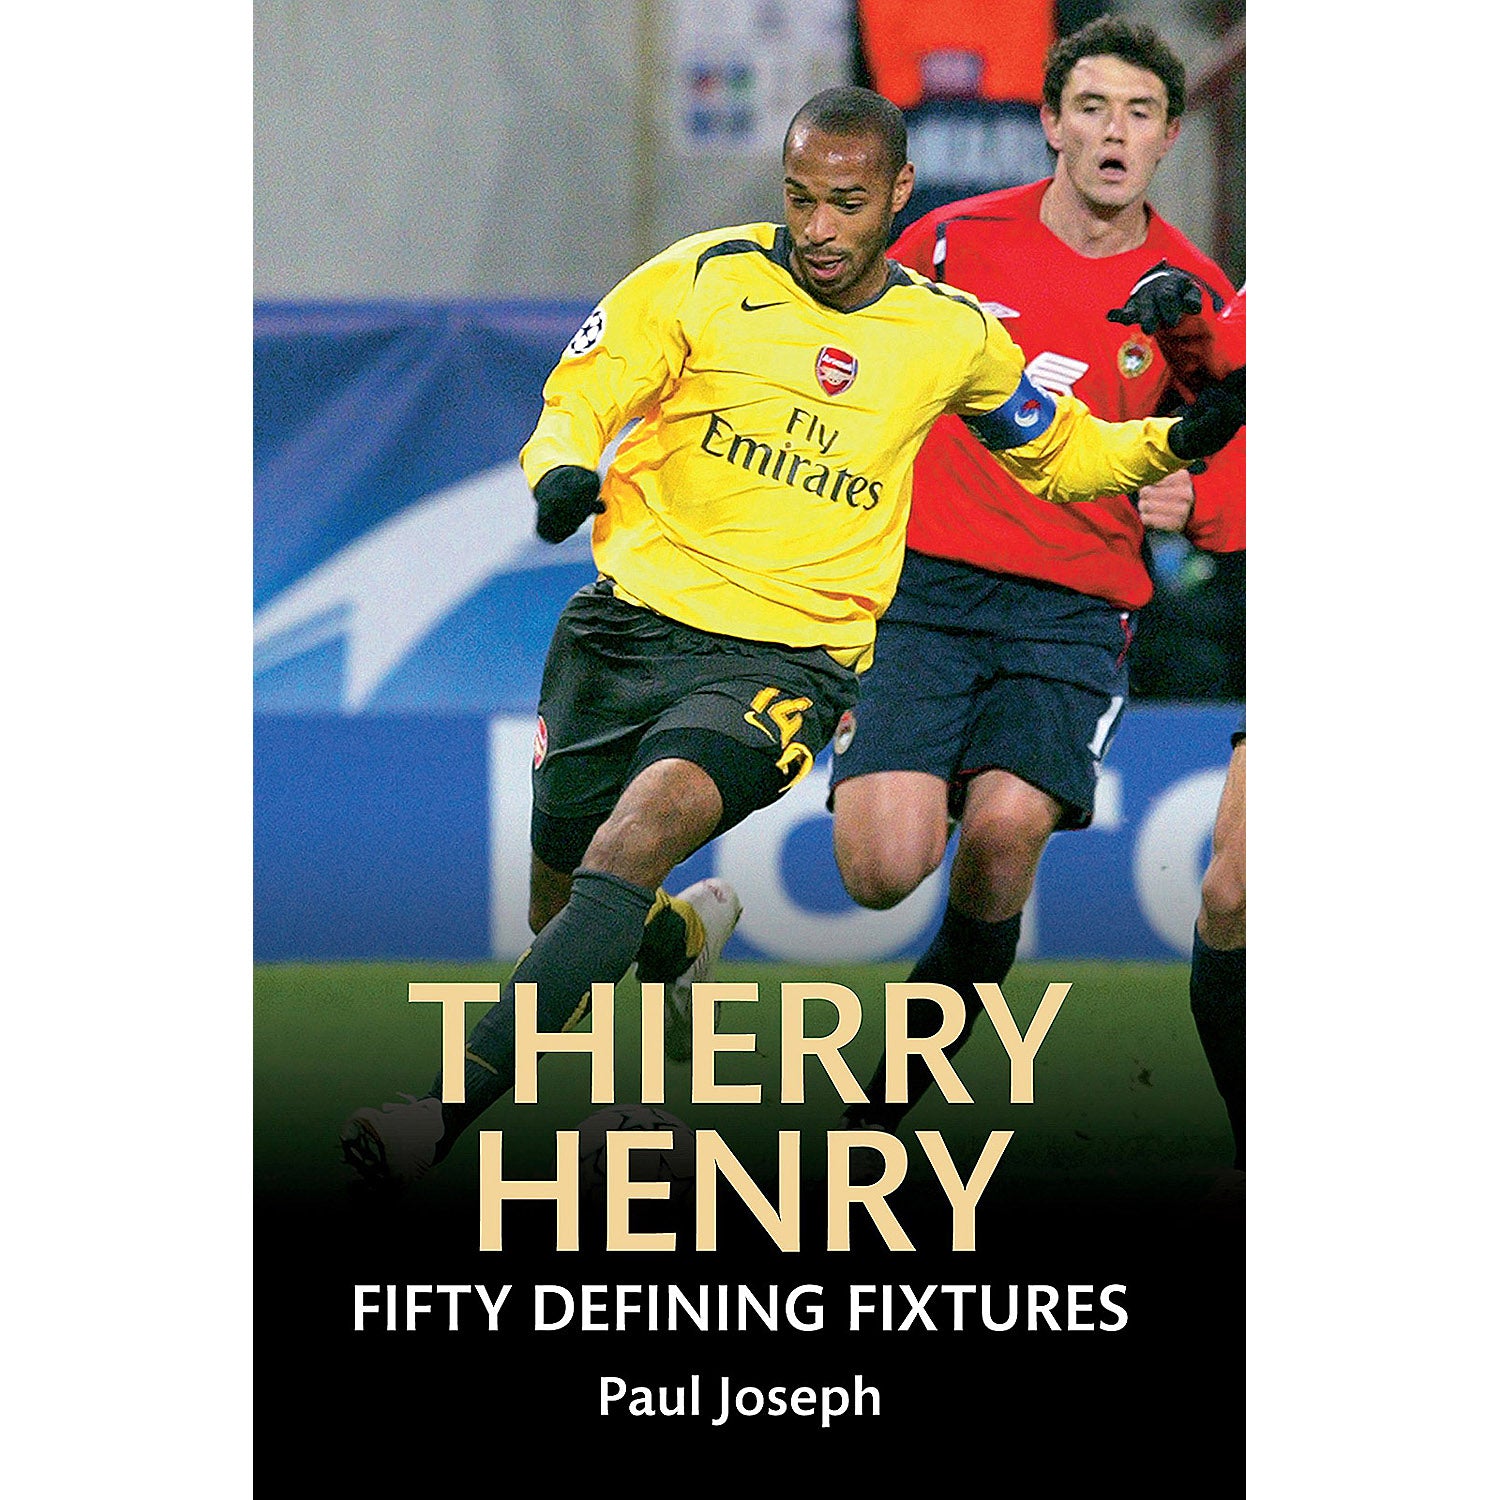 Thierry Henry – Fifty Defining Fixtures